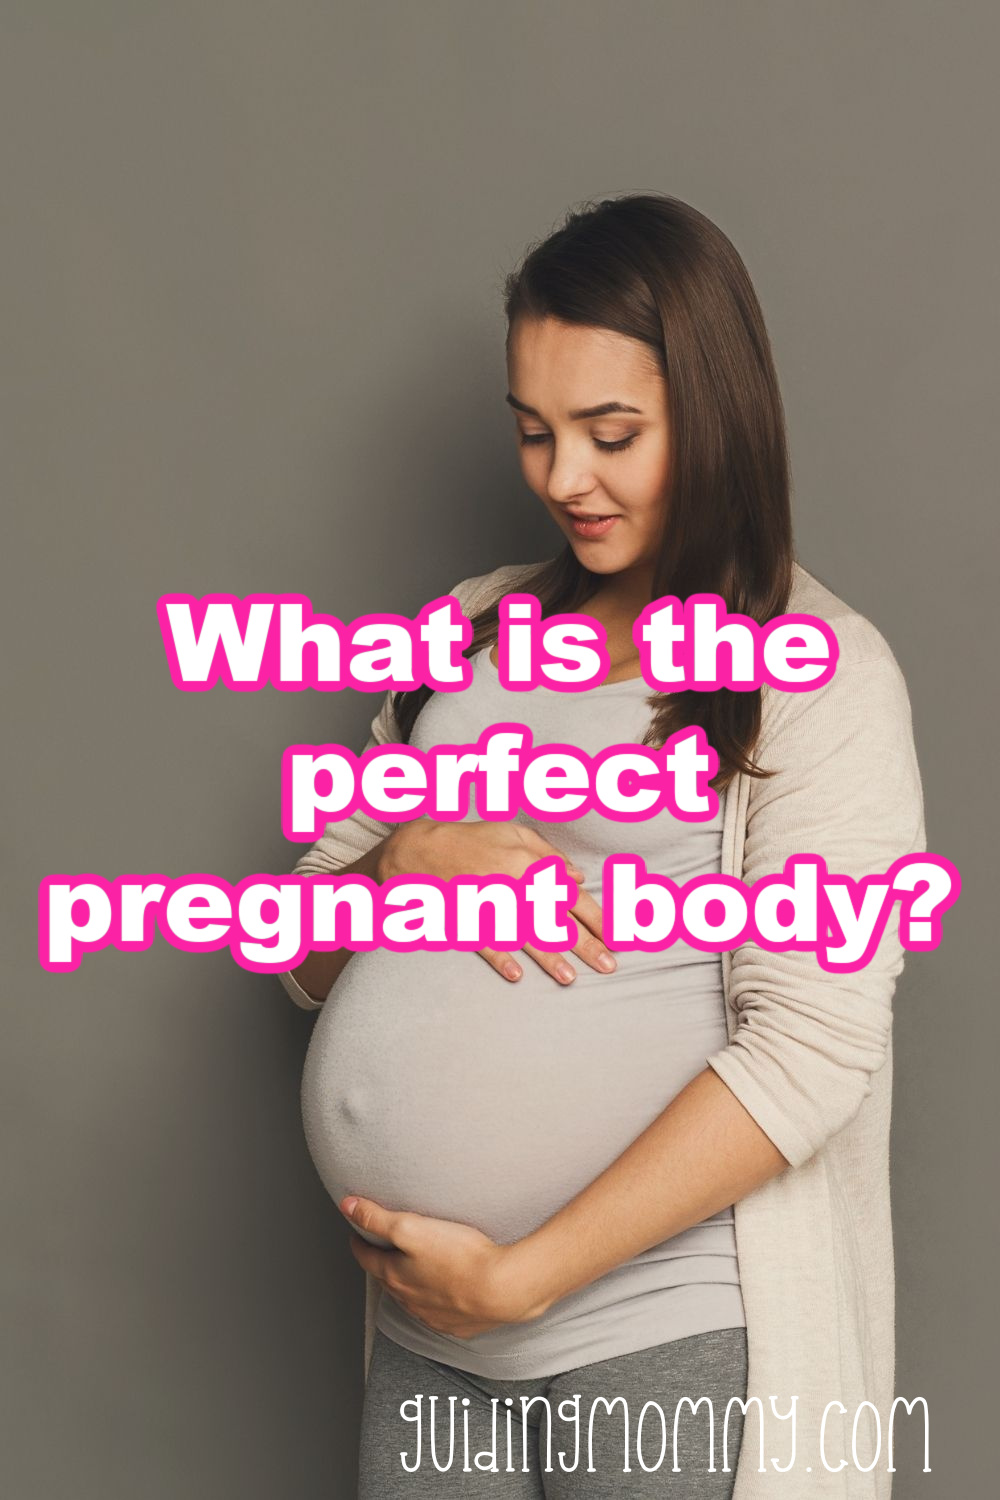 What is the perfect pregnant body